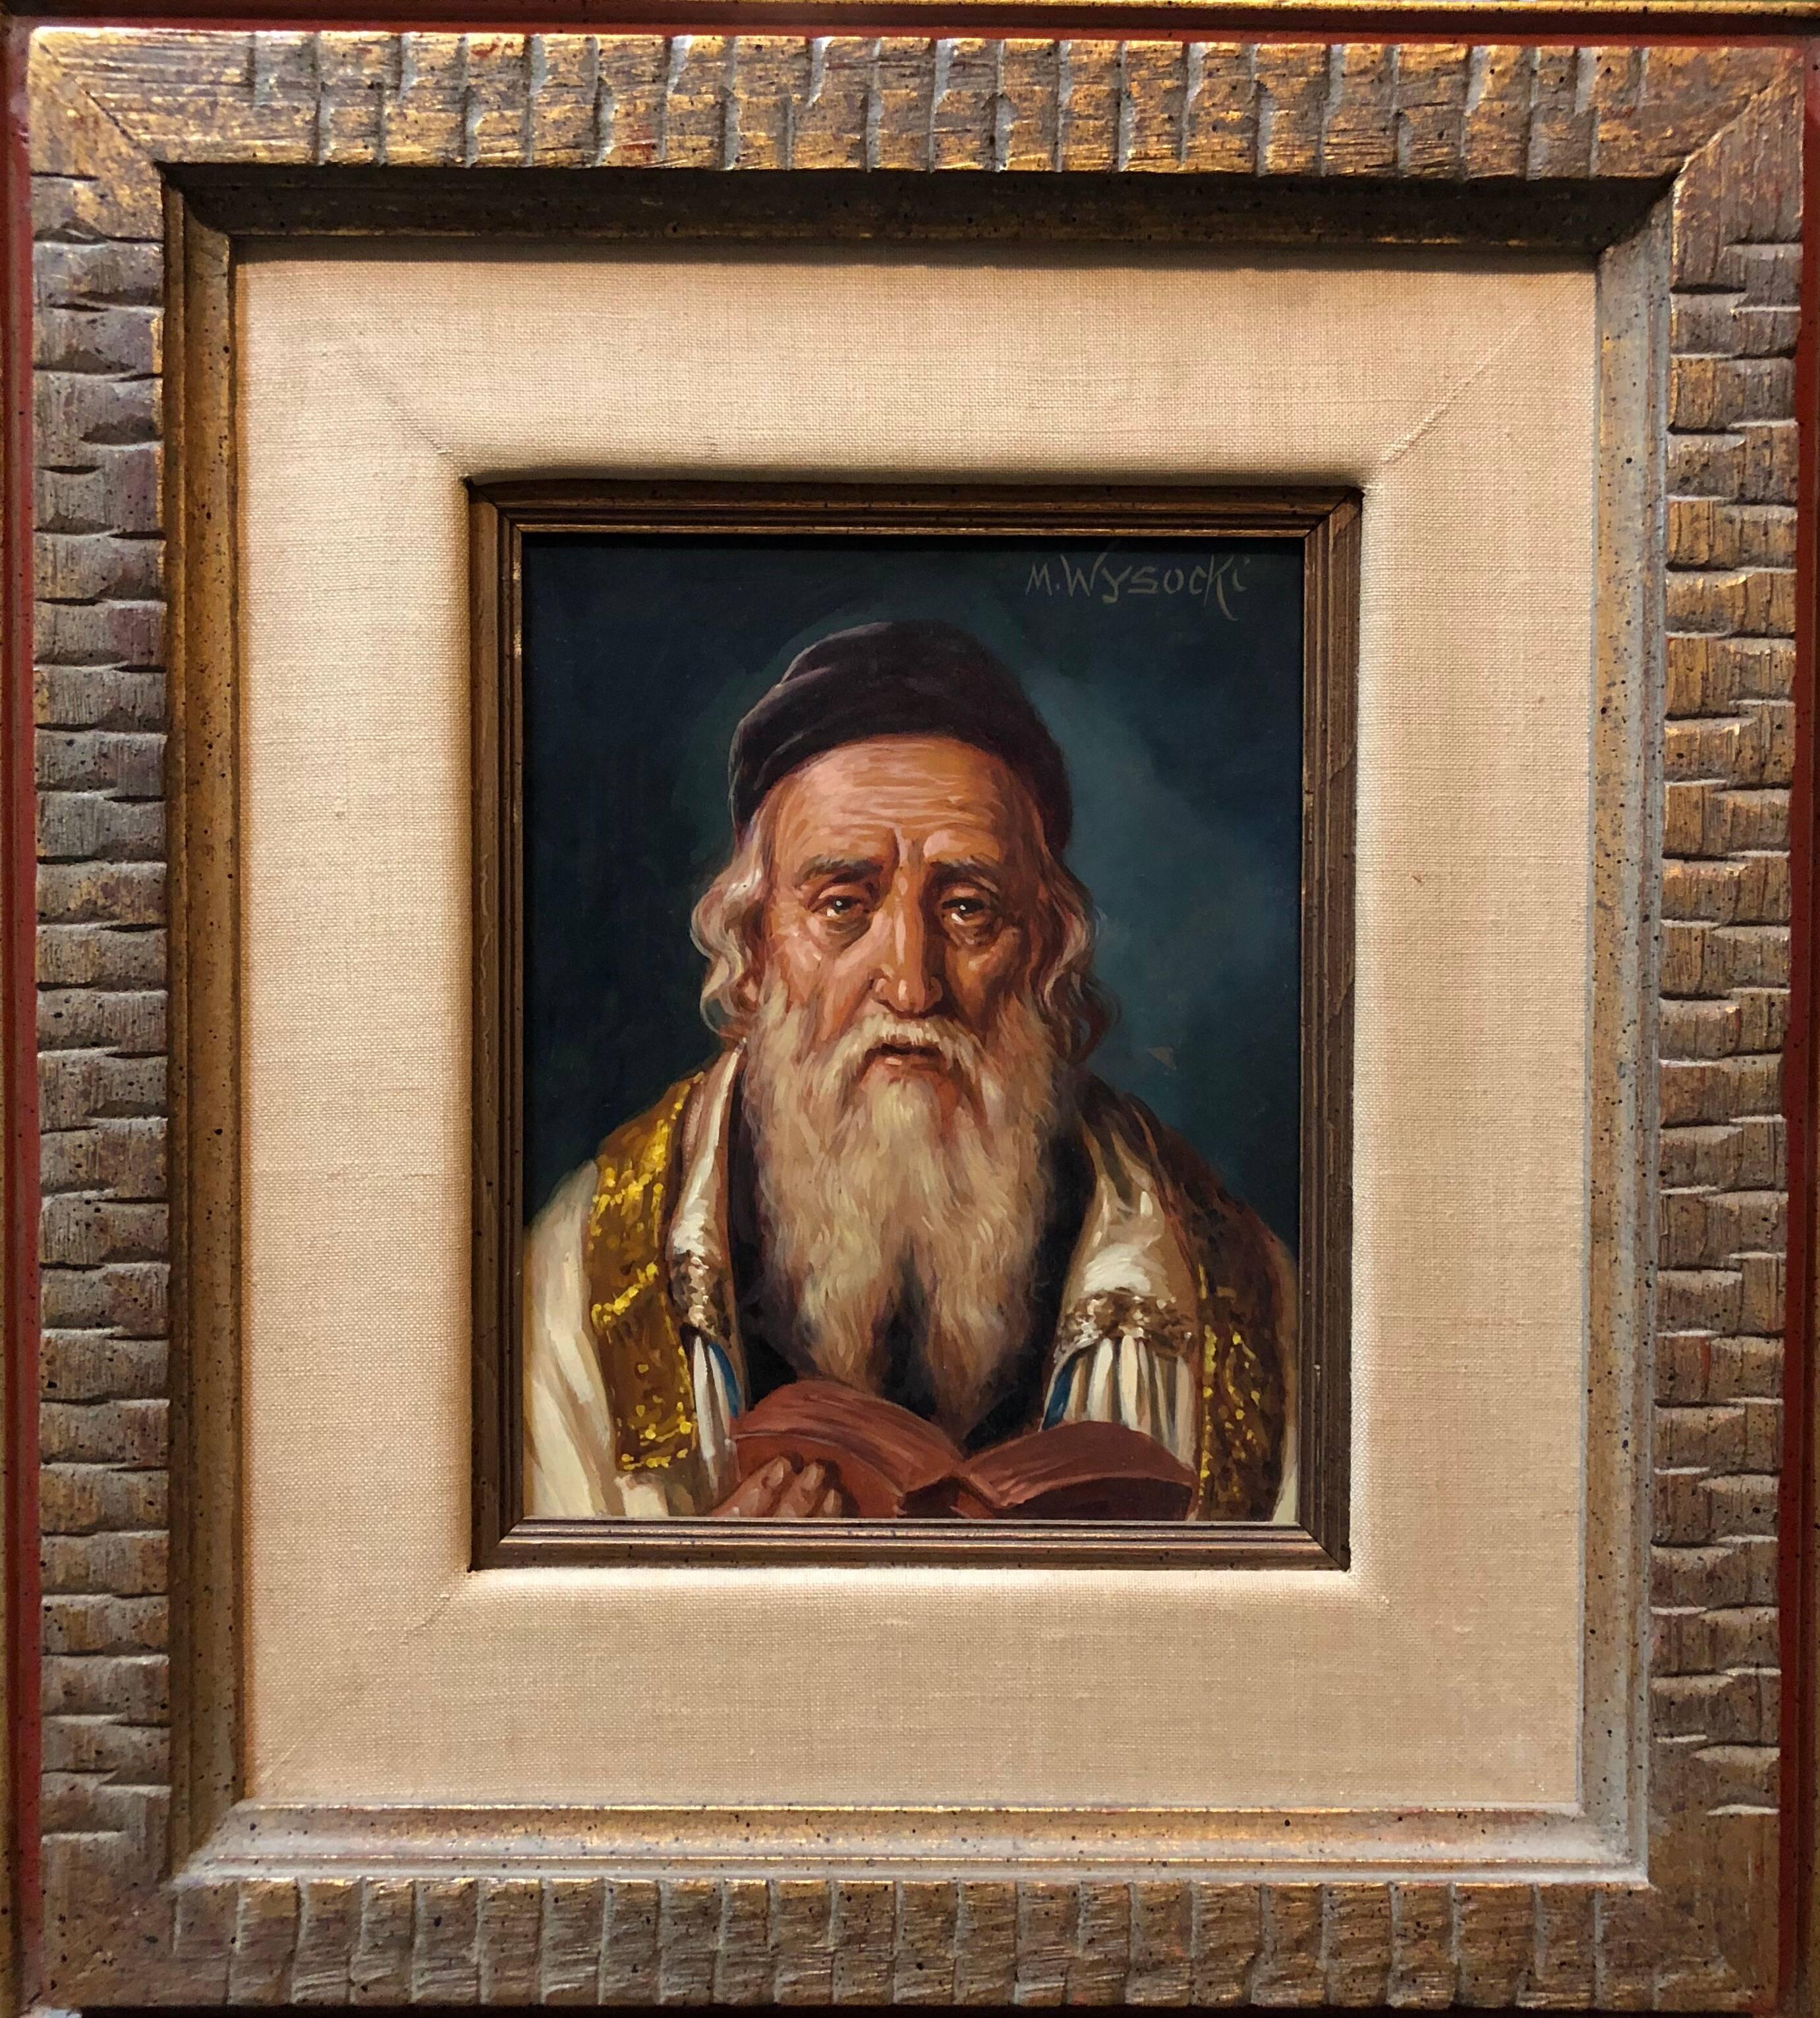 Realistic portrait of an older rabbi by Polish Austrian artist M. Wysocki. Here the artist conveys a sense of quiet grandeur through the eyes of his subject and the way it's rendered. Part of a distinguished European lineage of Jewish genre artists